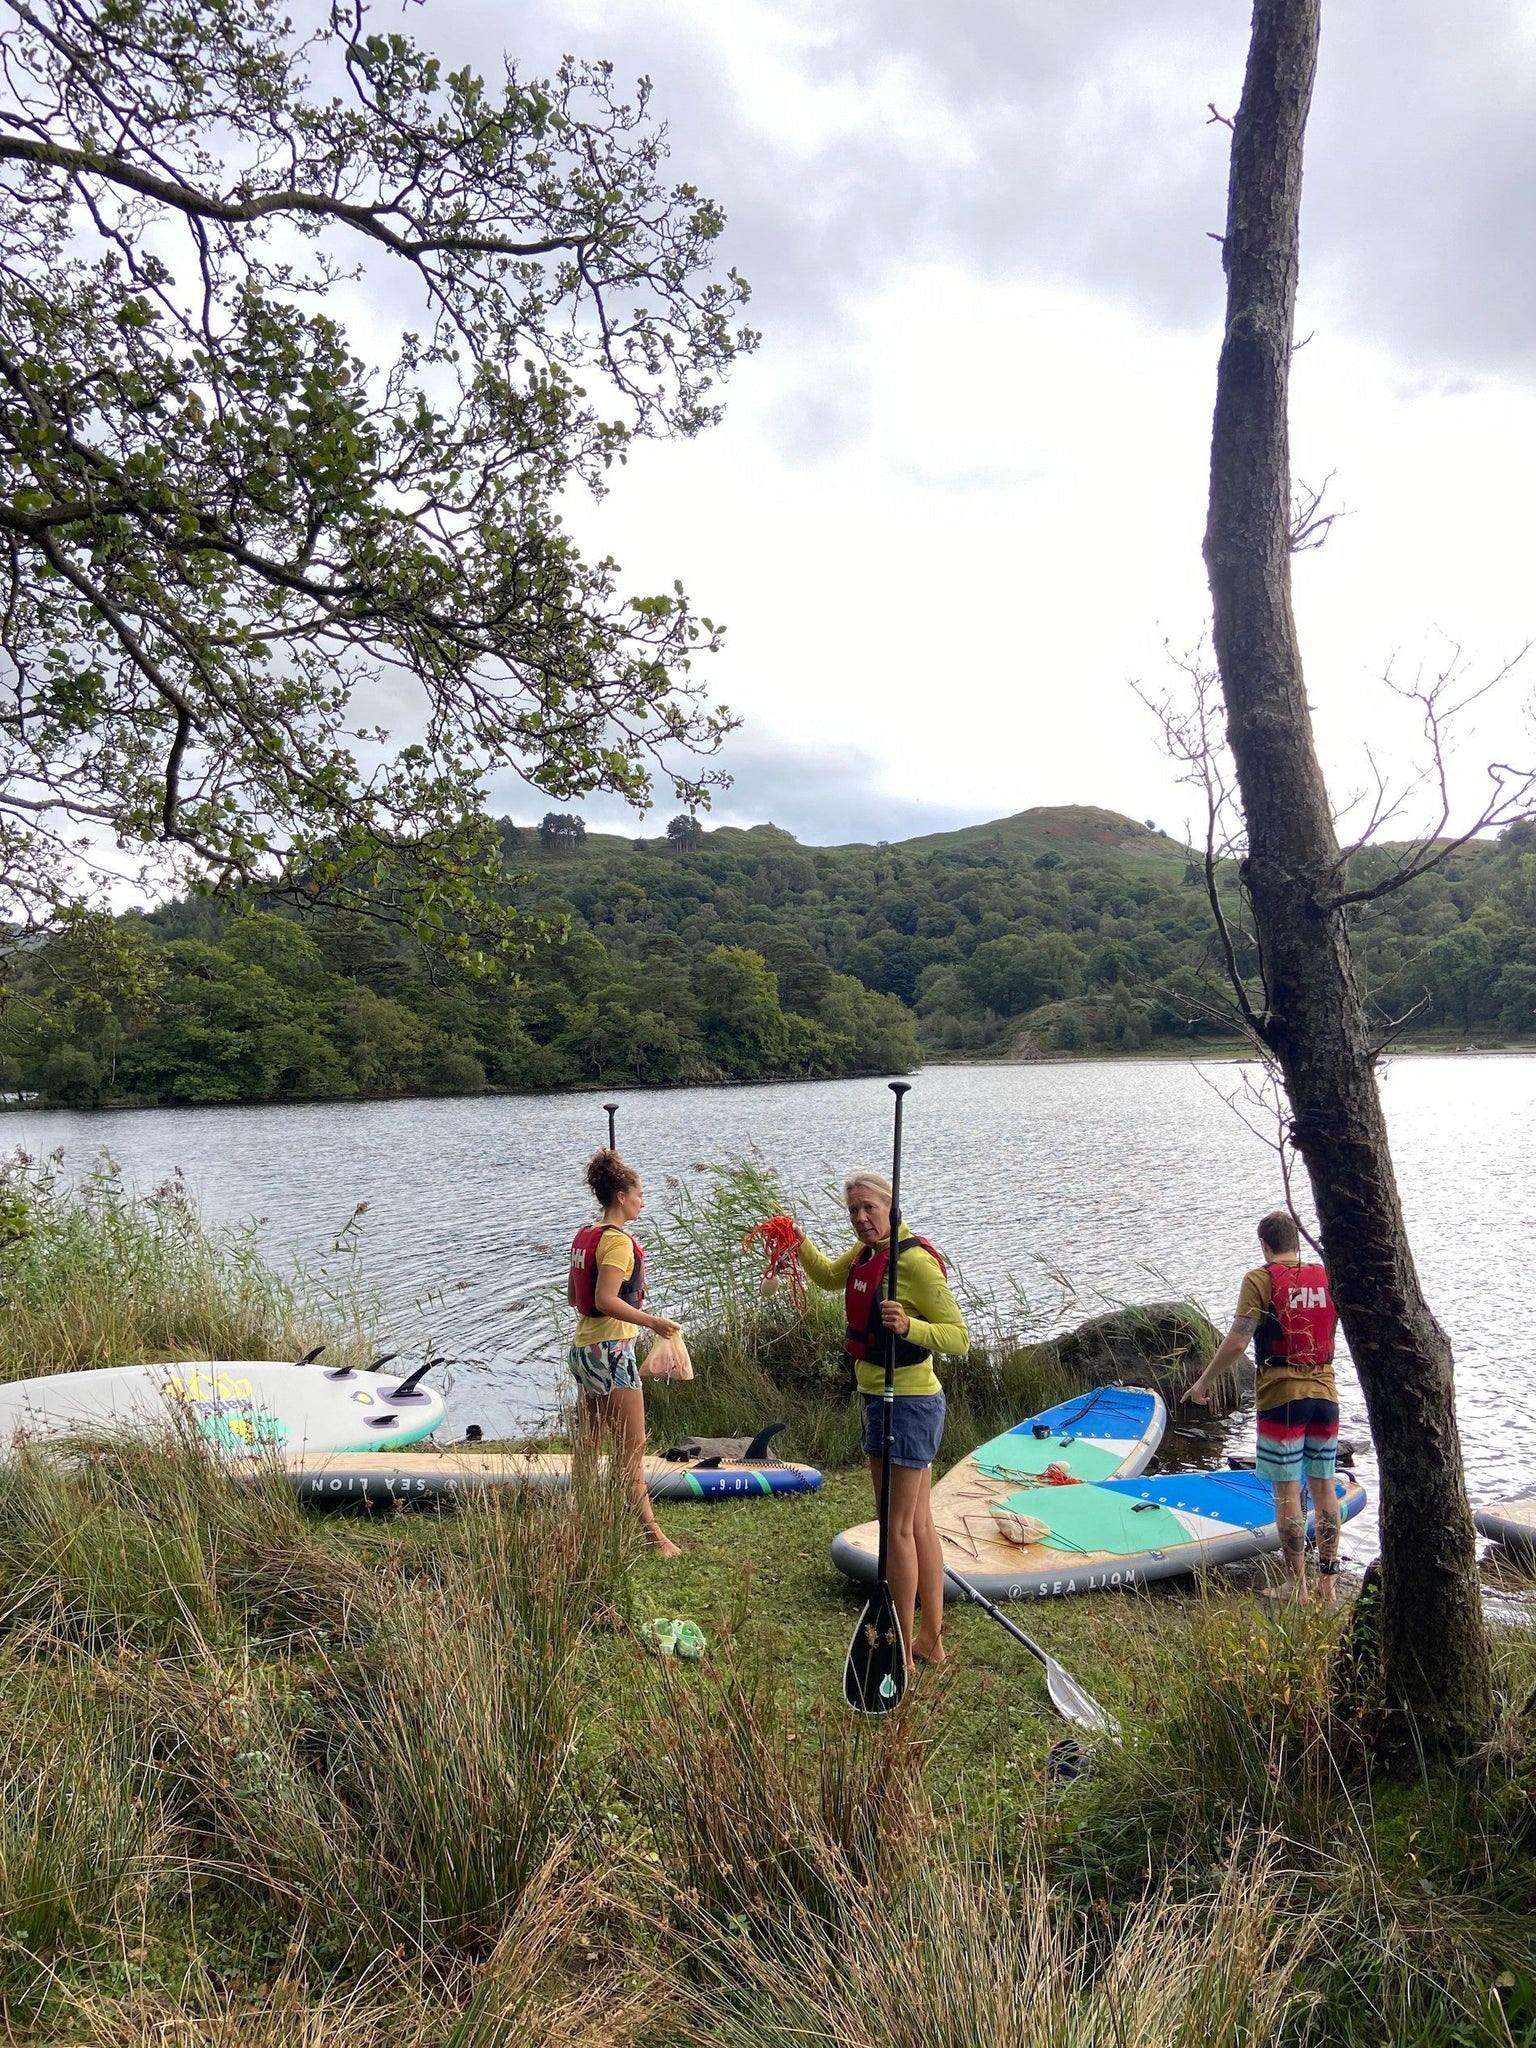 September 3-5th Yoga Retreat in the Lake District: yoga, paddle boarding, lakes & mountains